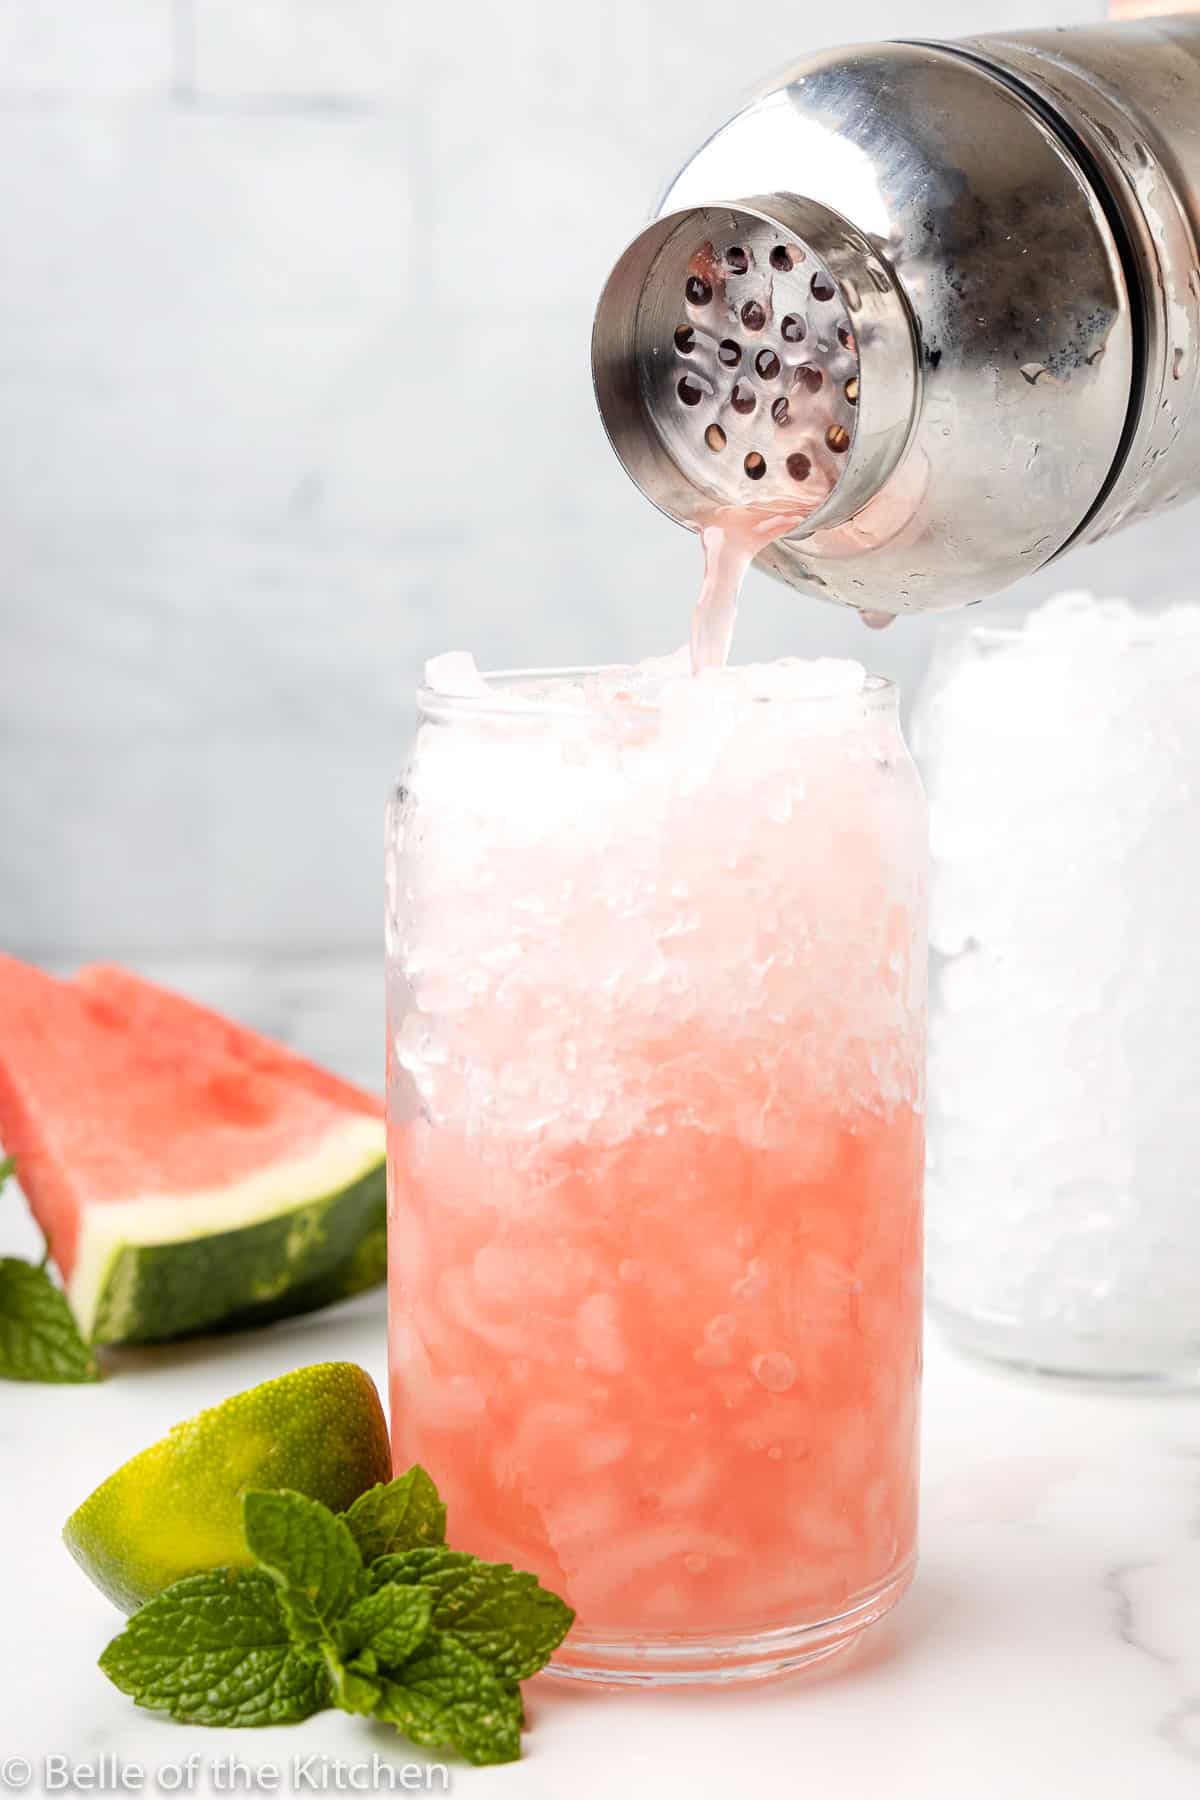 a cocktail shaker pouring into a glass of ice next to a slice of watermelon.